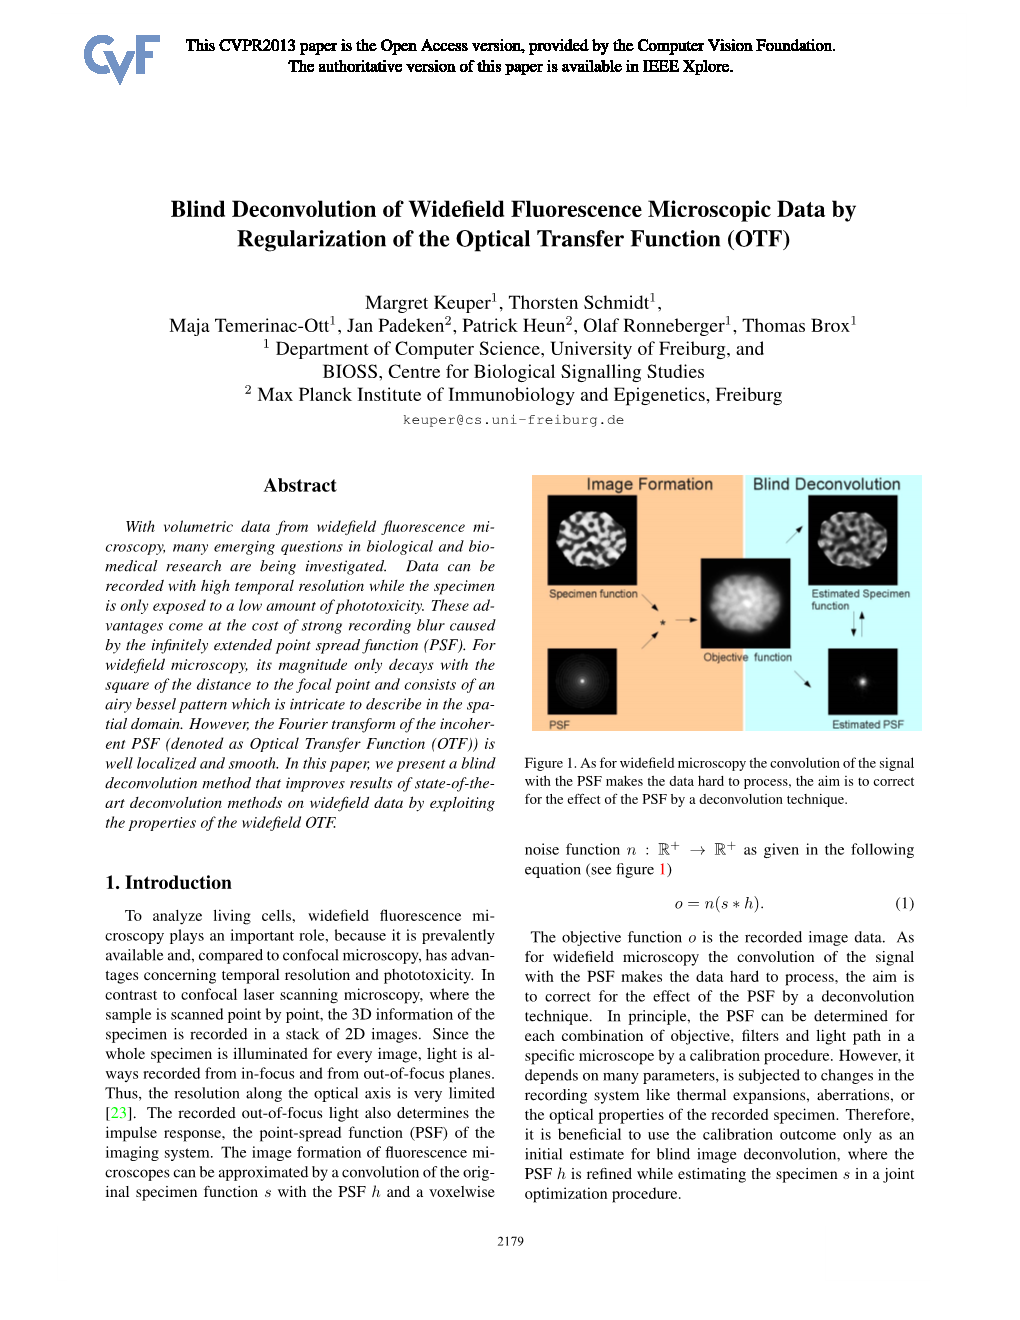 Blind Deconvolution of Widefield Fluorescence Microscopic Data By